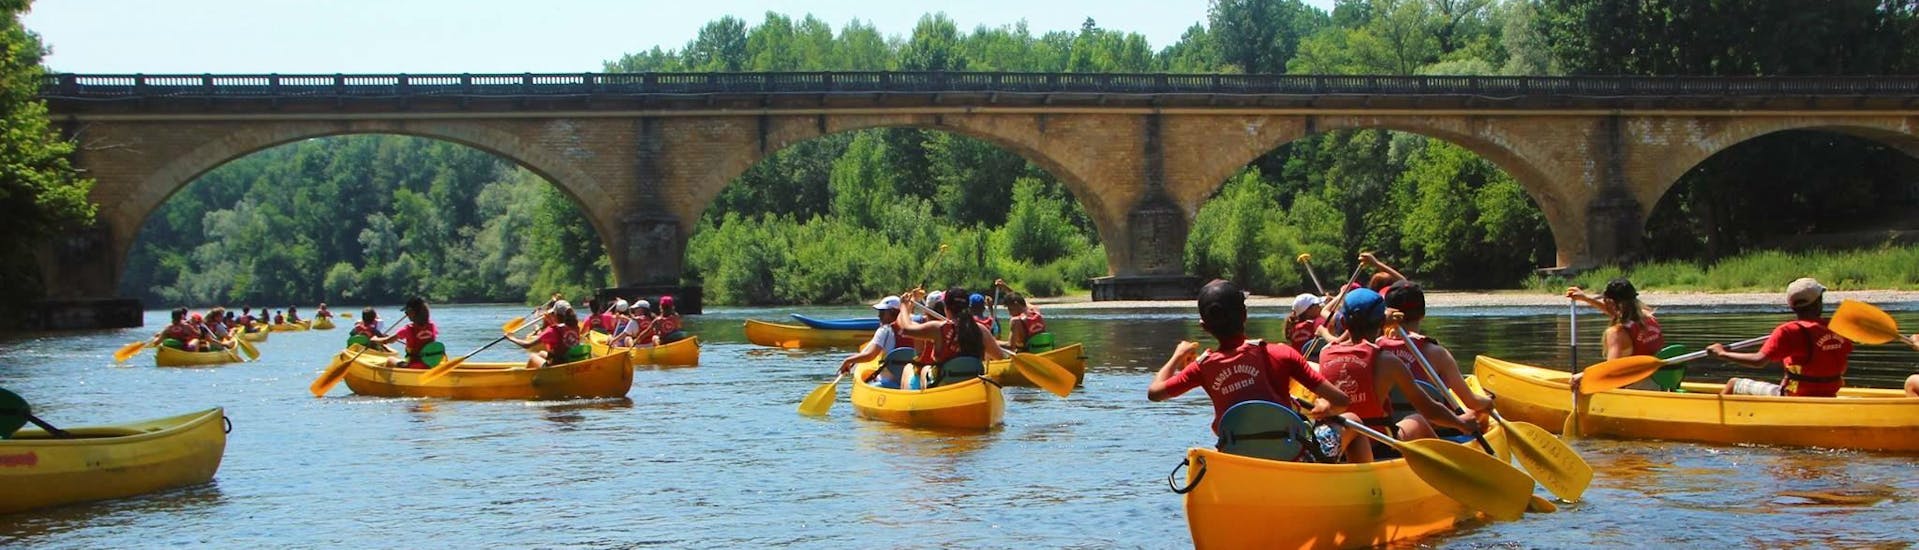 Holidaymakers are paddling on the Dordogne River during their 9 km canoe trip with Canoës Loisirs Dordogne.